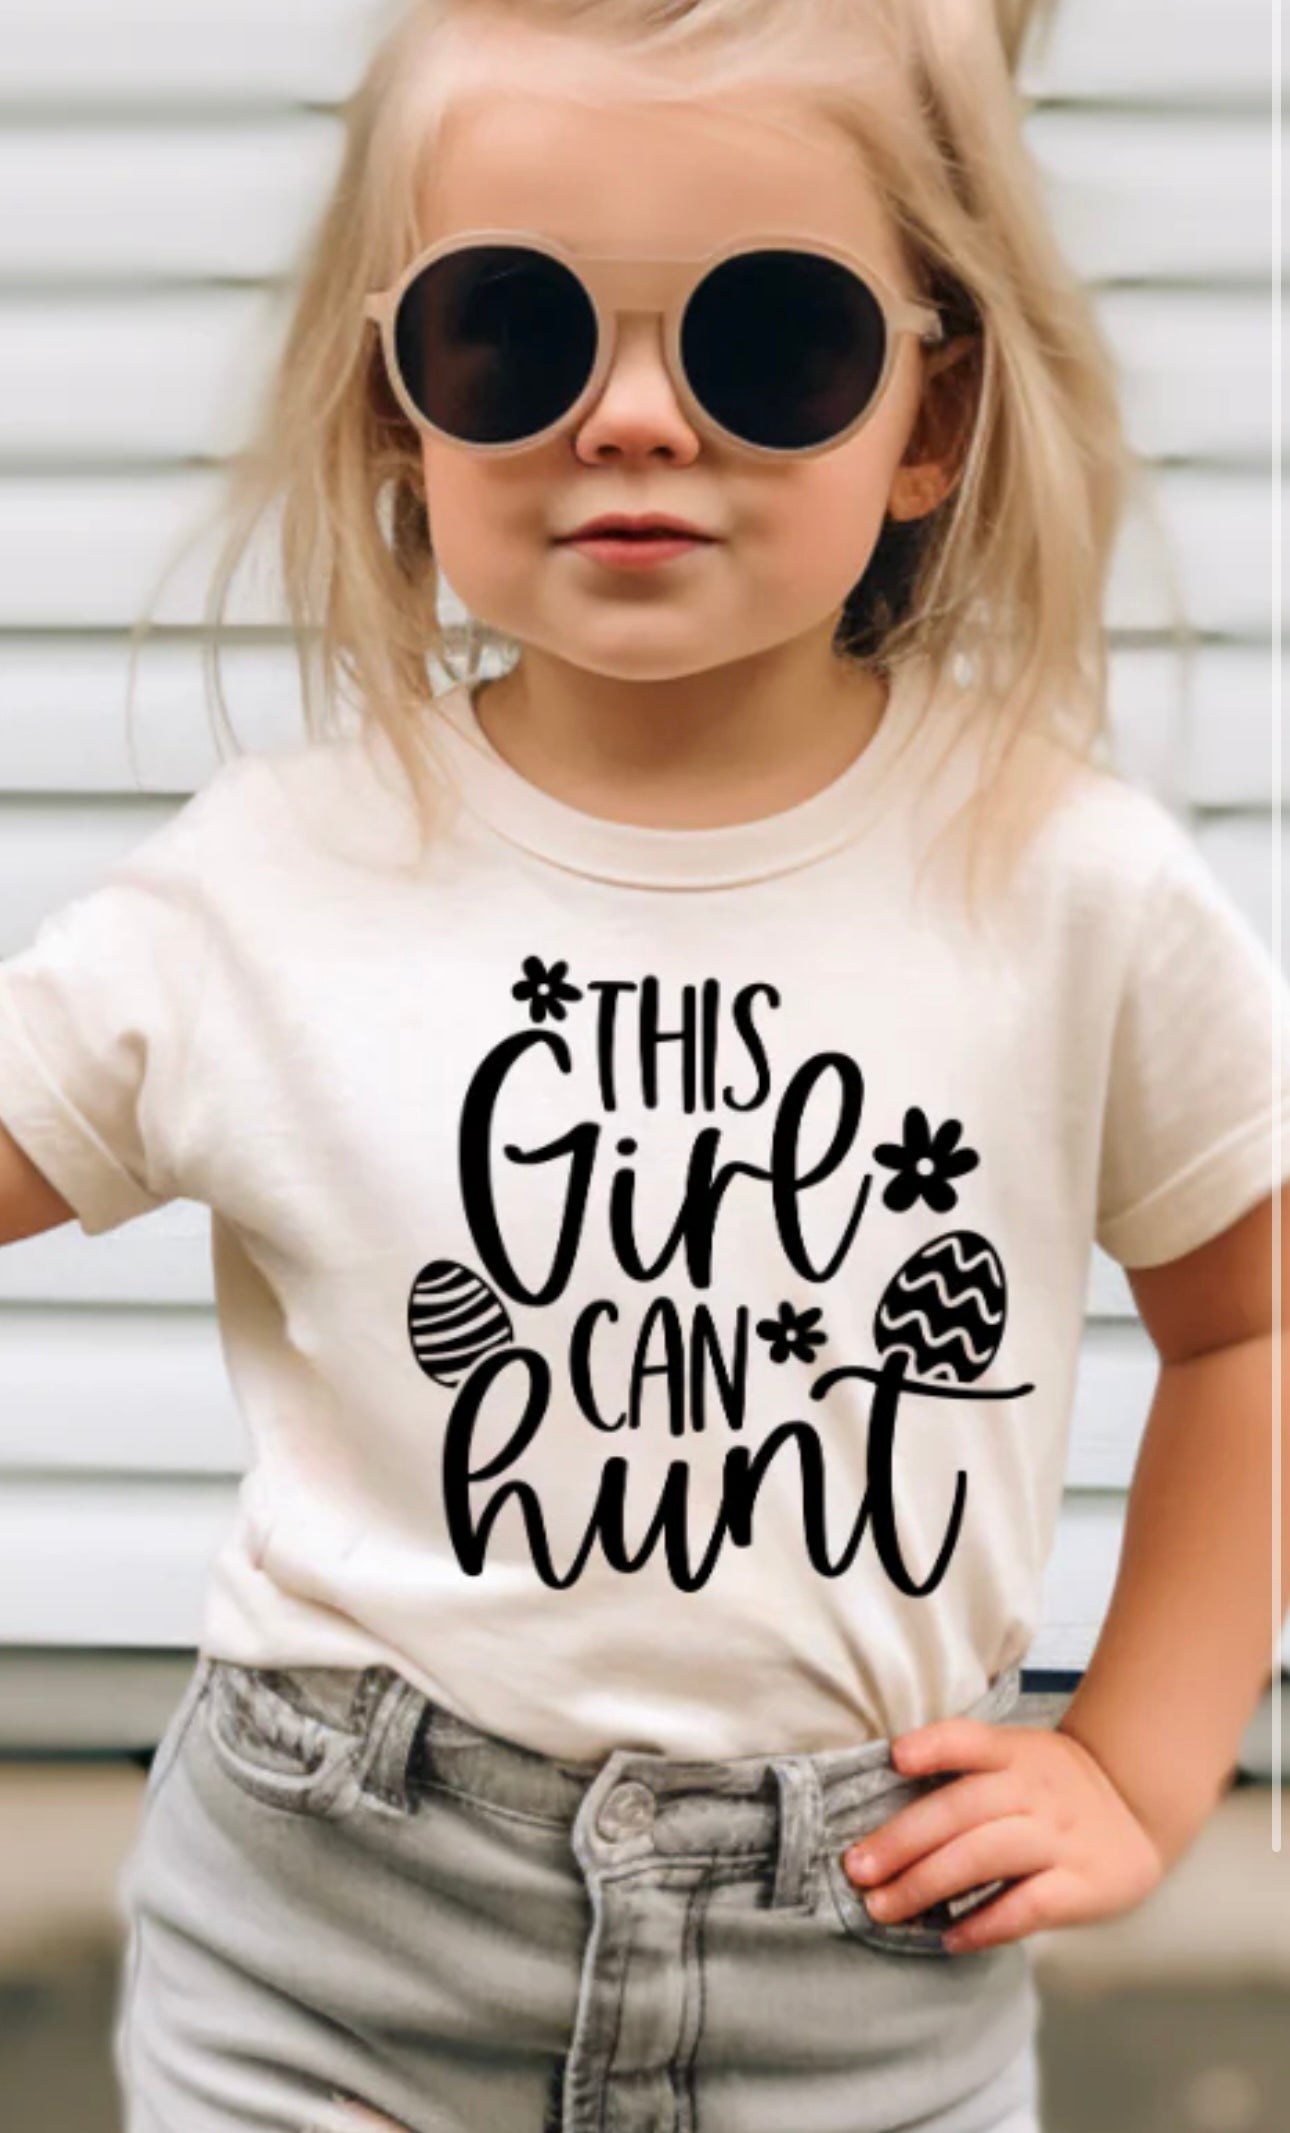 Kid - Screen Print - This Girl Can Hunt